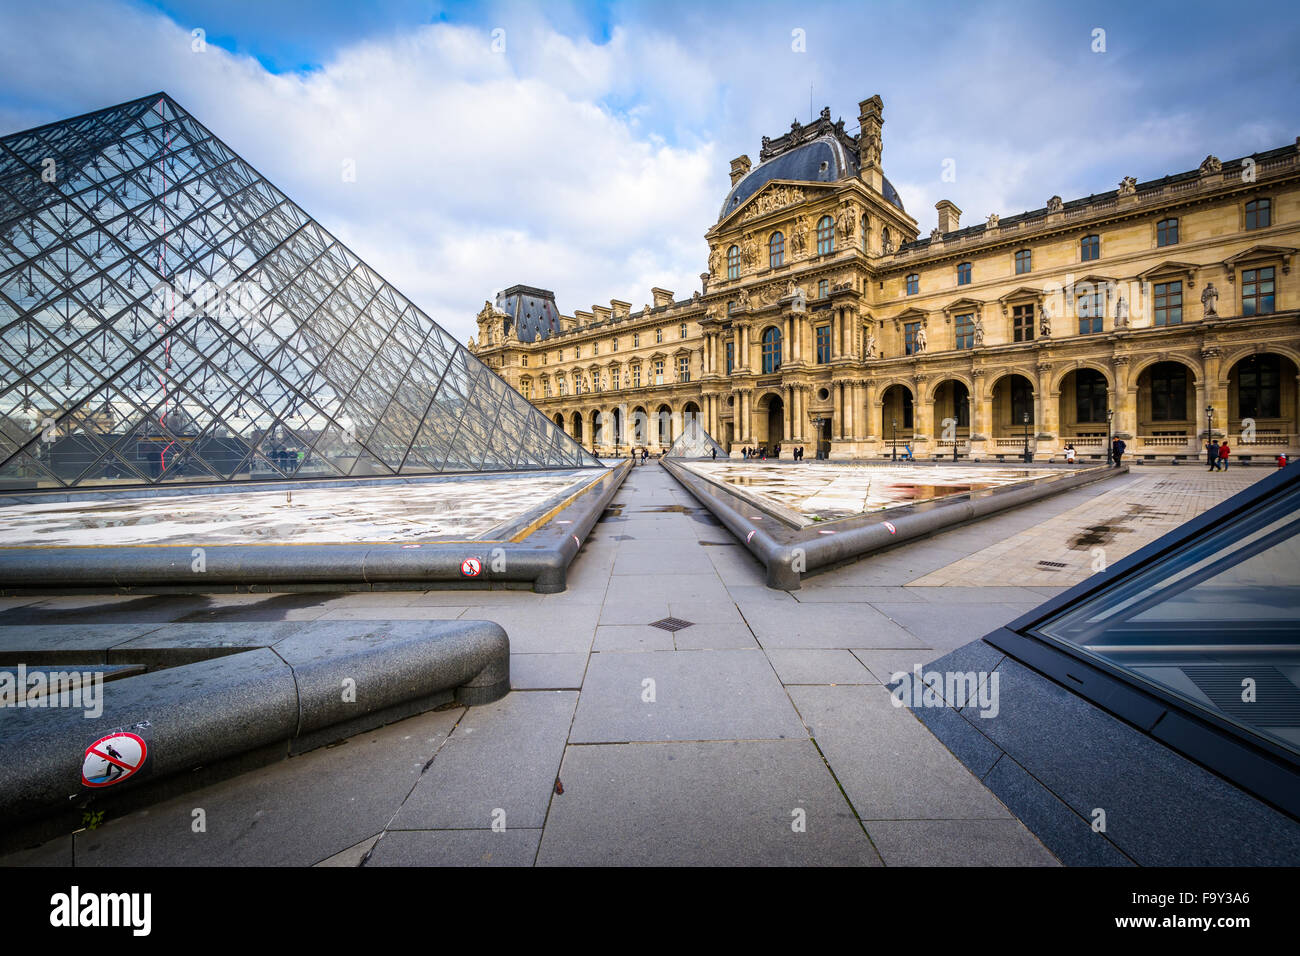 The Louvre Pyramid, in the courtyard of the Louvre Palace, in Paris, France. Stock Photo